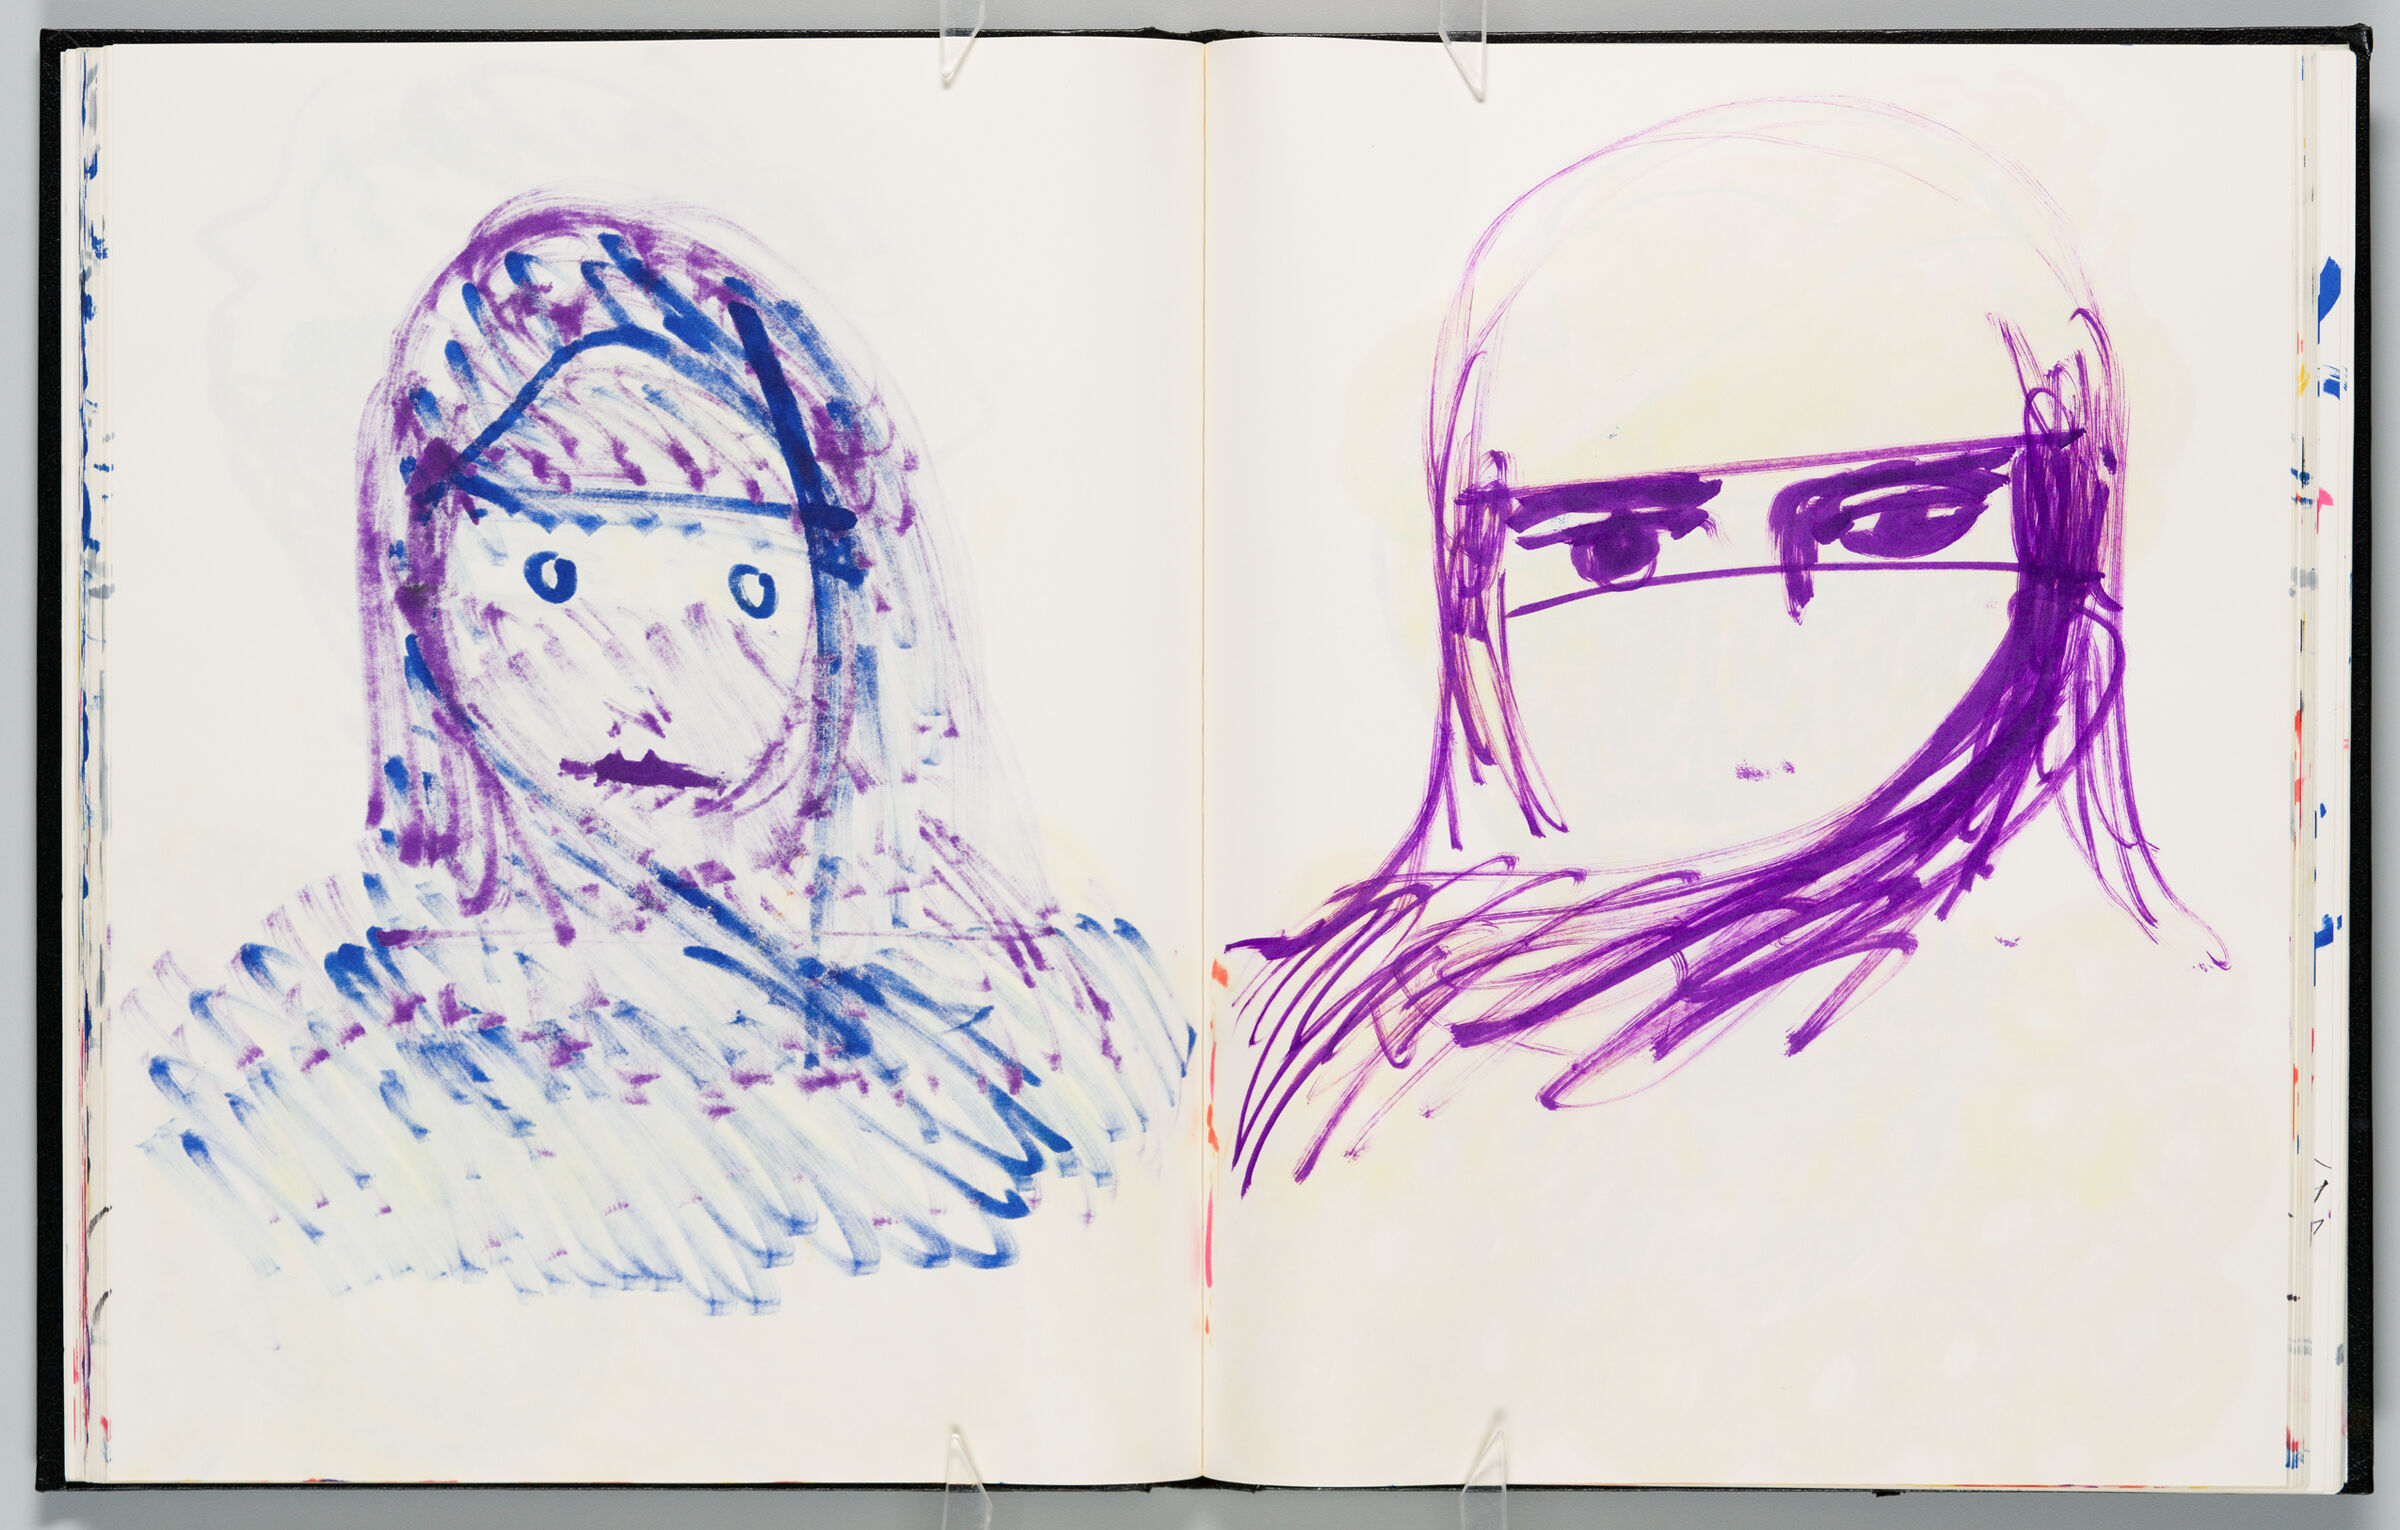 Untitled (Bleed-Through Of Previous Page, Left Page); Untitled (Portrait Of Veiled Figure, Right Page)